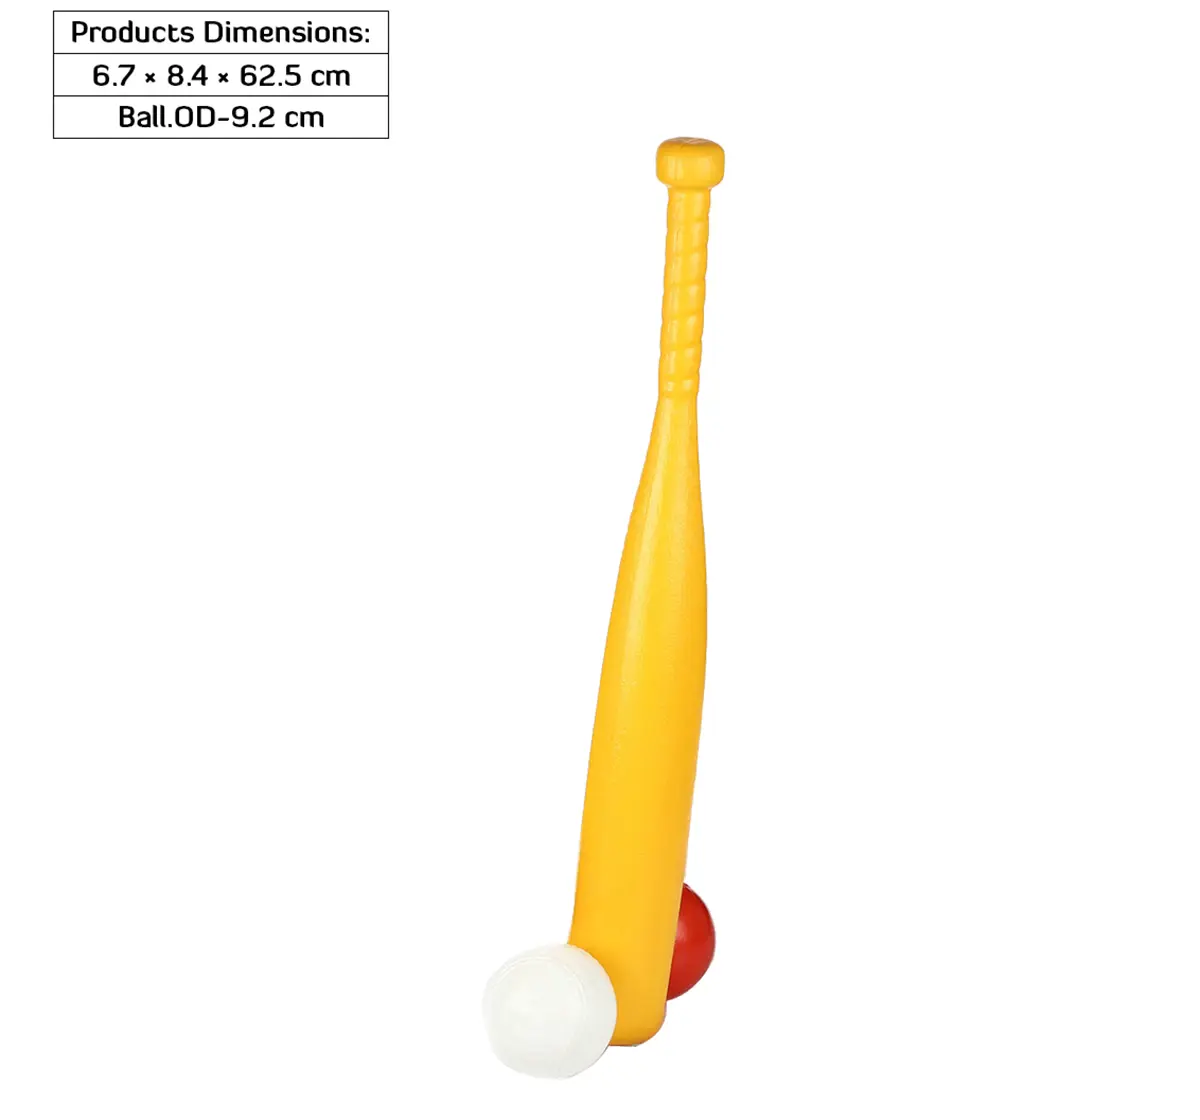 Zoozi Striker Baseball Bat with Ball for Kids Multicolor 5Y+